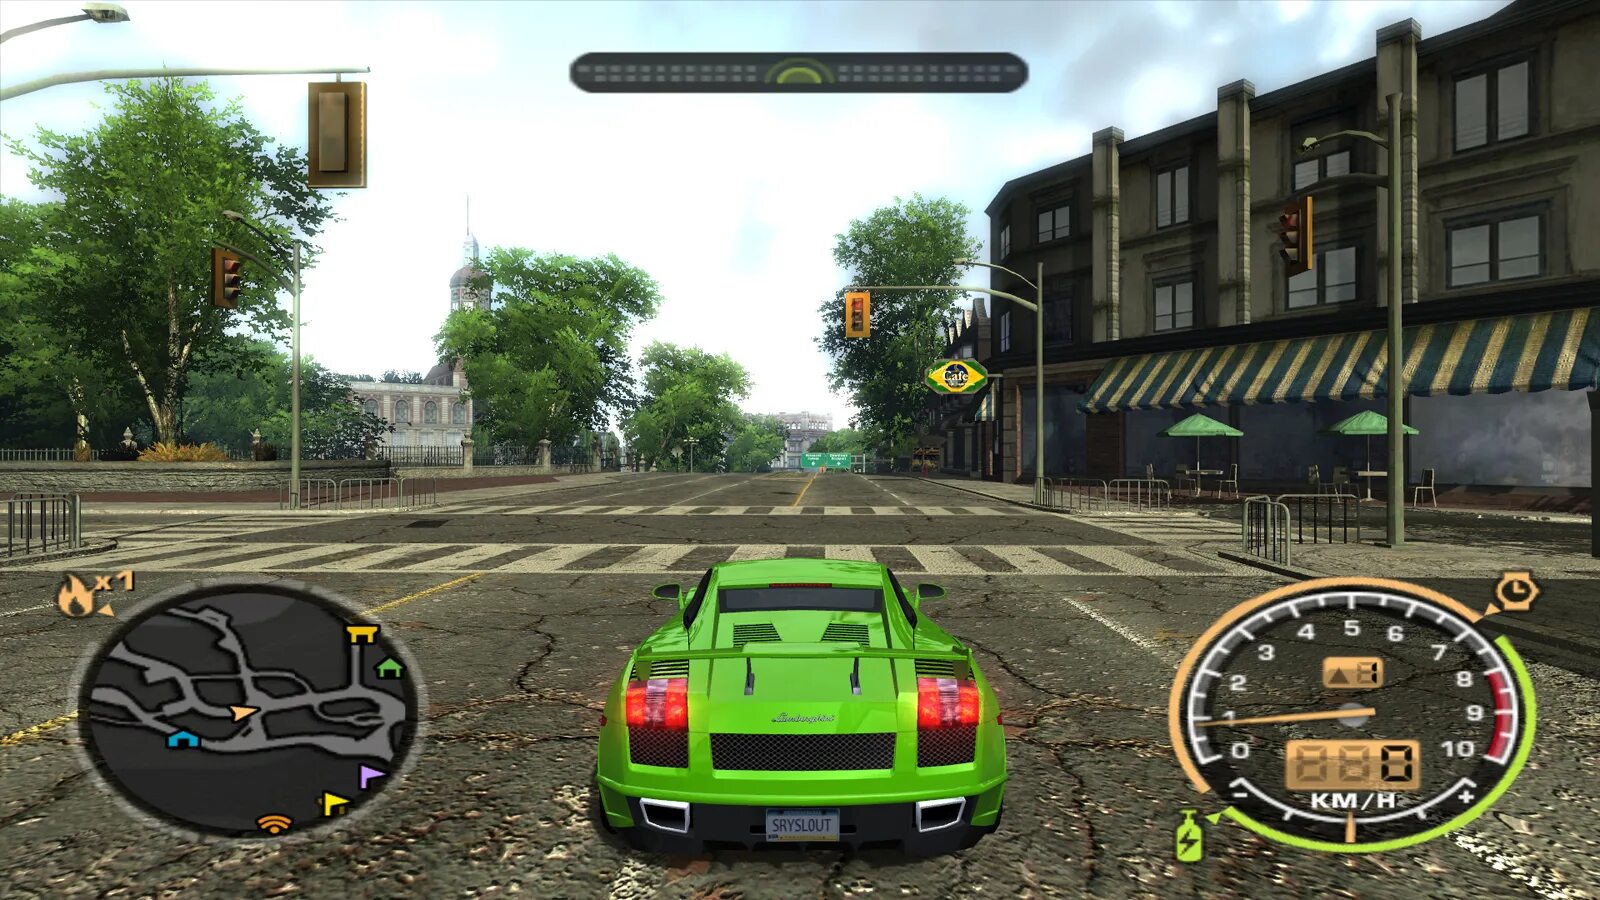 Nfs most wanted mobile 2005. NFS most wanted 2005. Игра most wanted 2005. NFS MW 2005 Nintendo DS. NFS most wanted 2005 GAMECUBE.